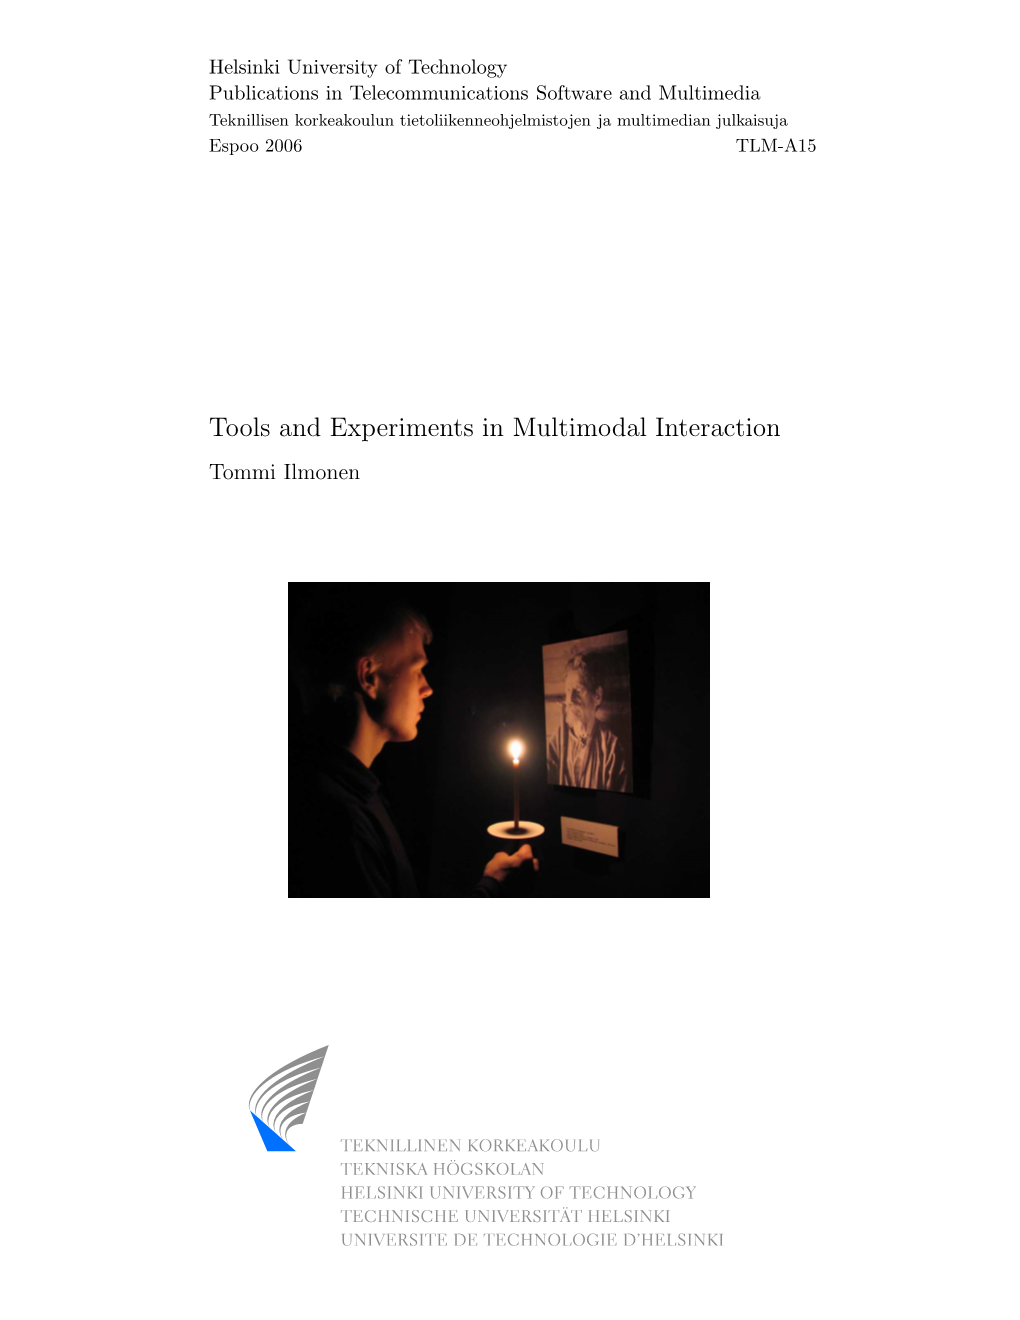 Tools and Experiments in Multimodal Interaction Tommi Ilmonen